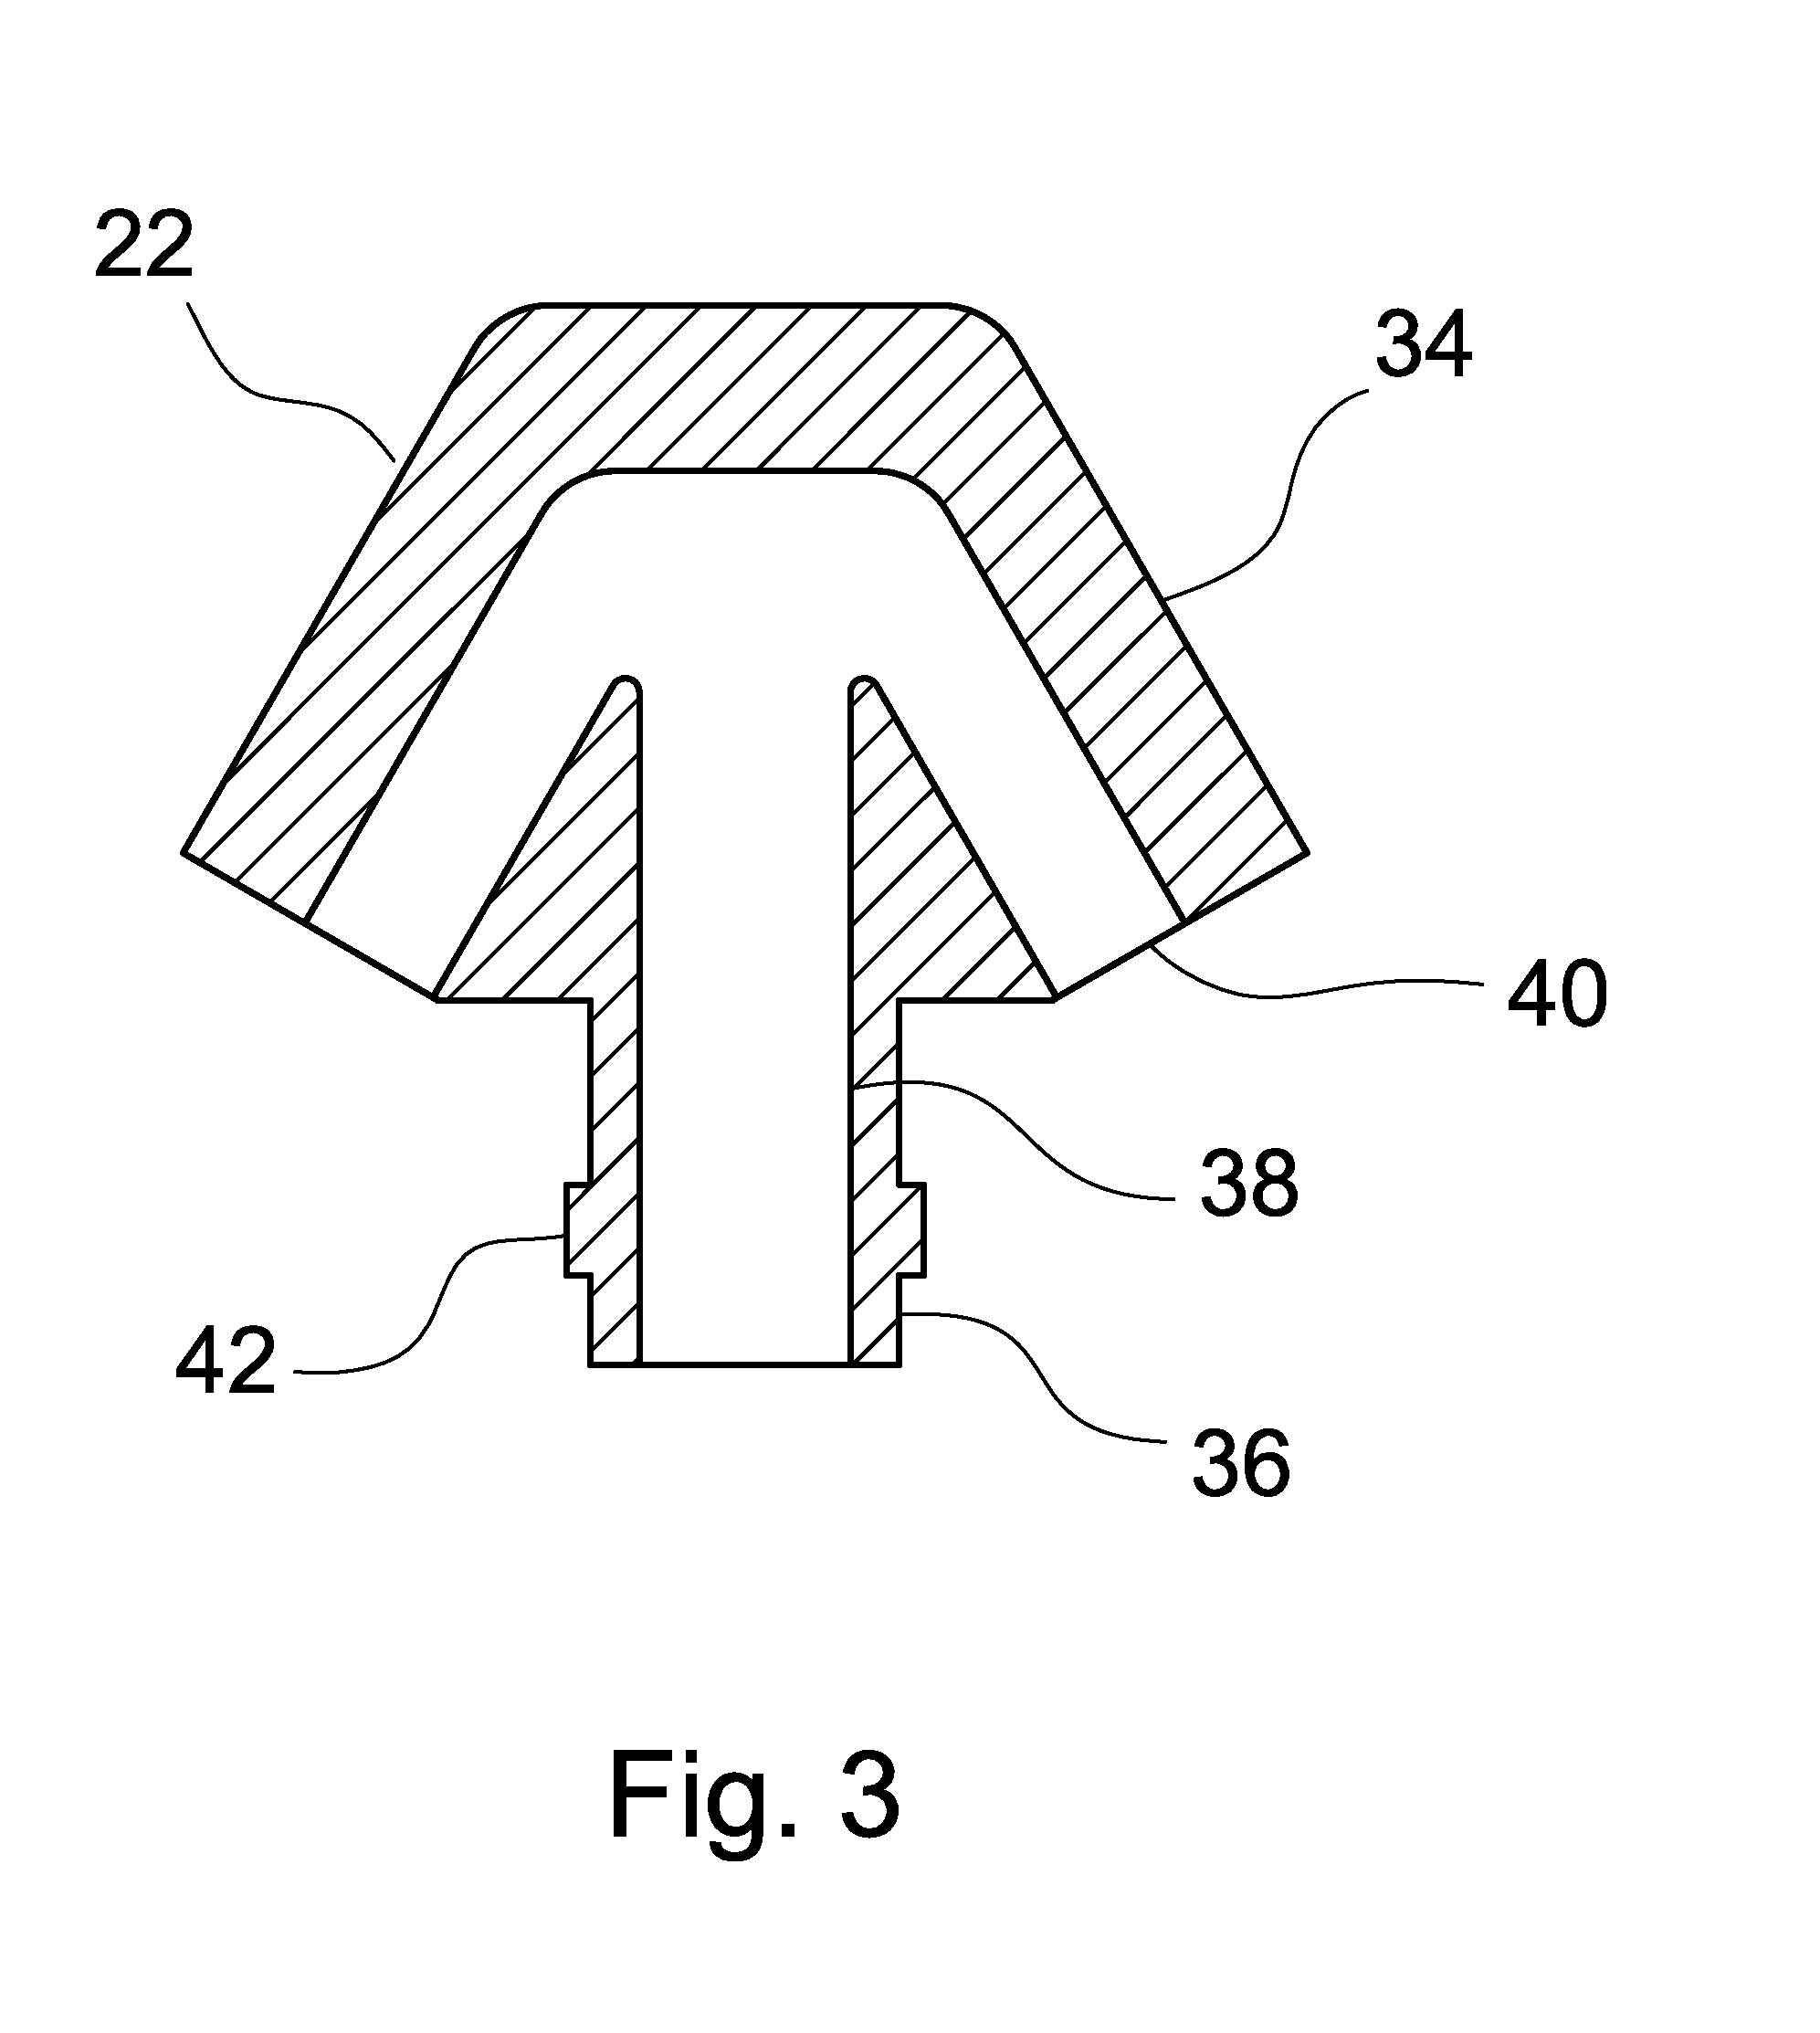 Grid nozzle assembly, a fluidized bed reactor with a grid nozzle assembly and methods of using a grid nozzle assembly